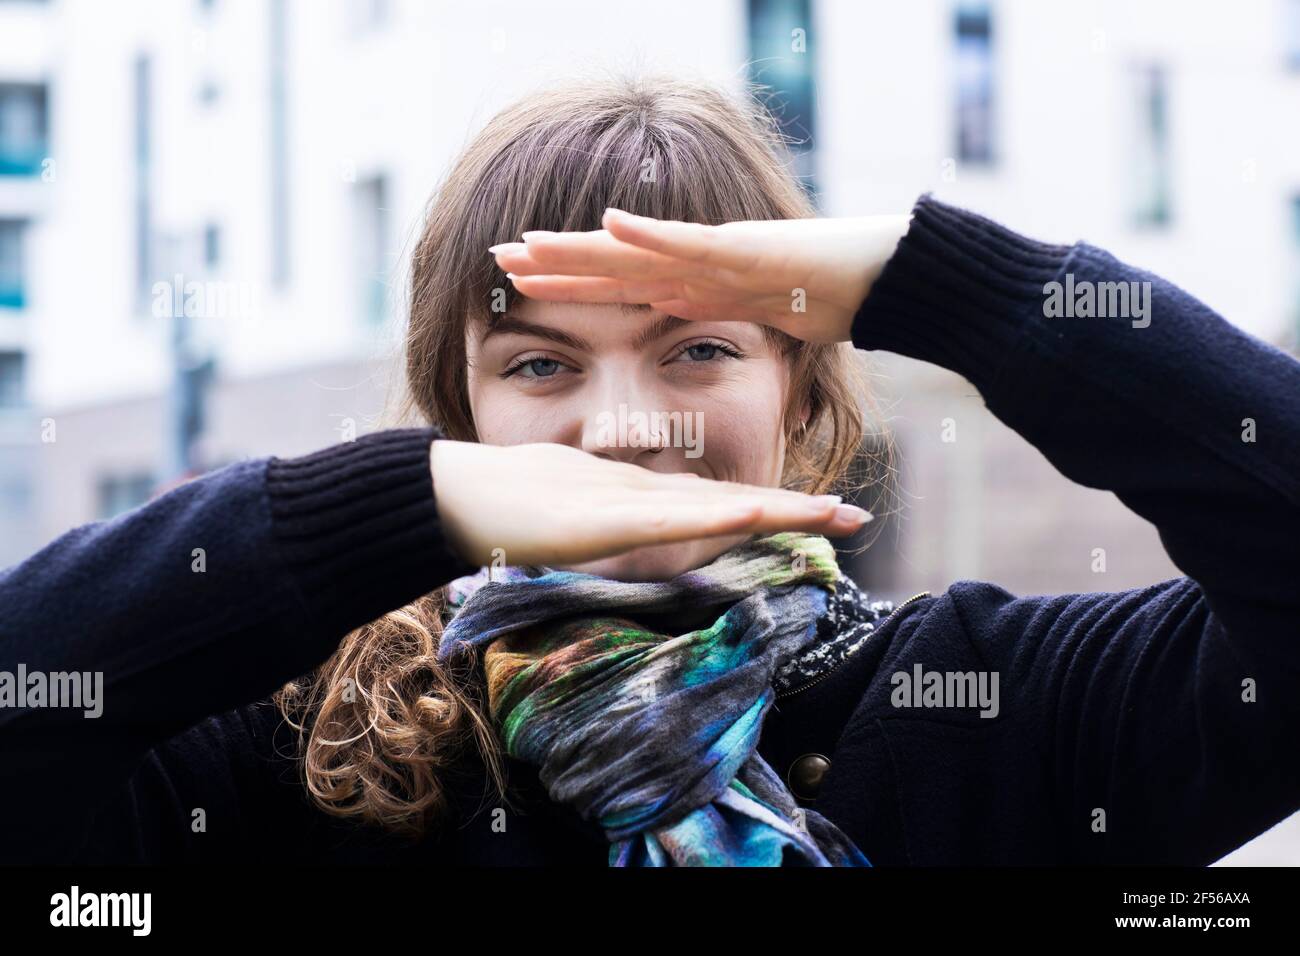 Smiling woman looking through hand gesture while standing outdoors Stock Photo